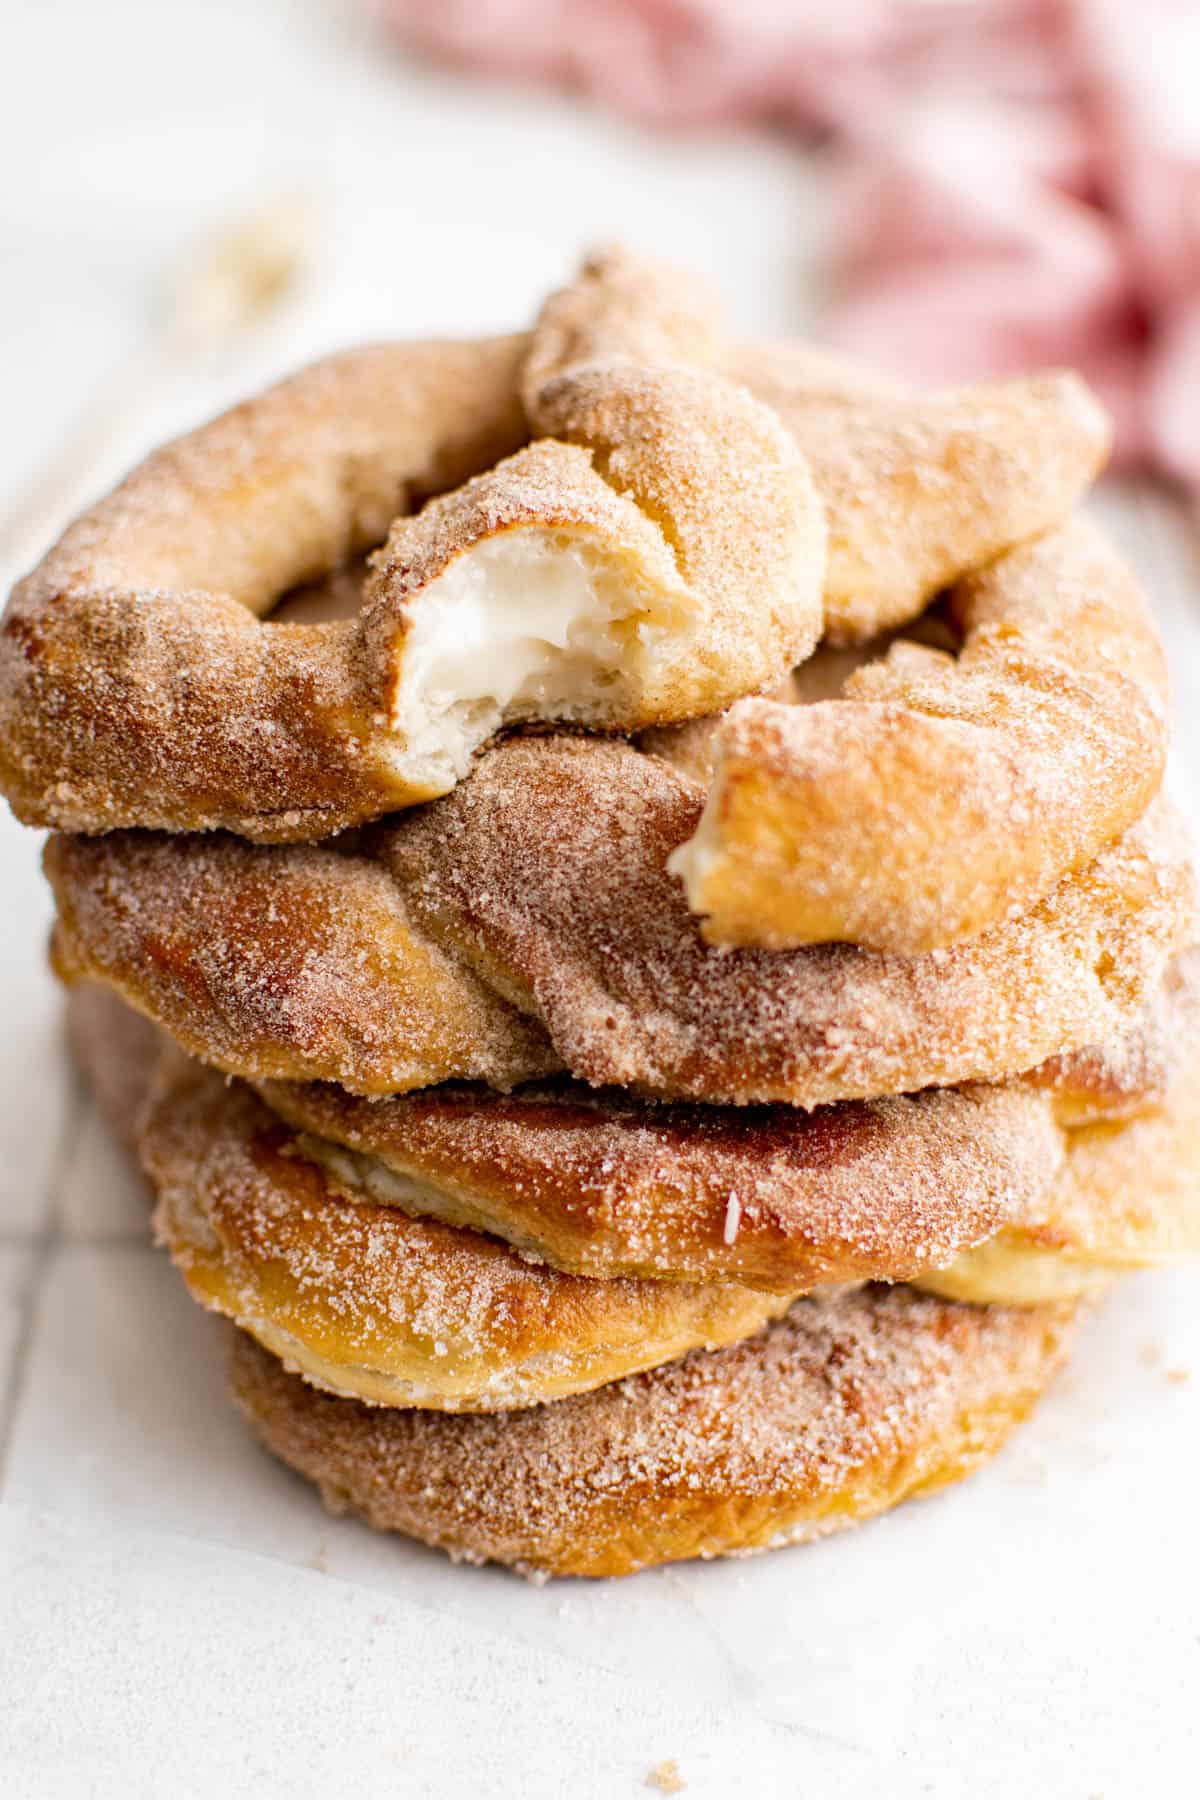 a stack of stuffed pretzels with a bit out of one pretzel to show the cream cheese filling